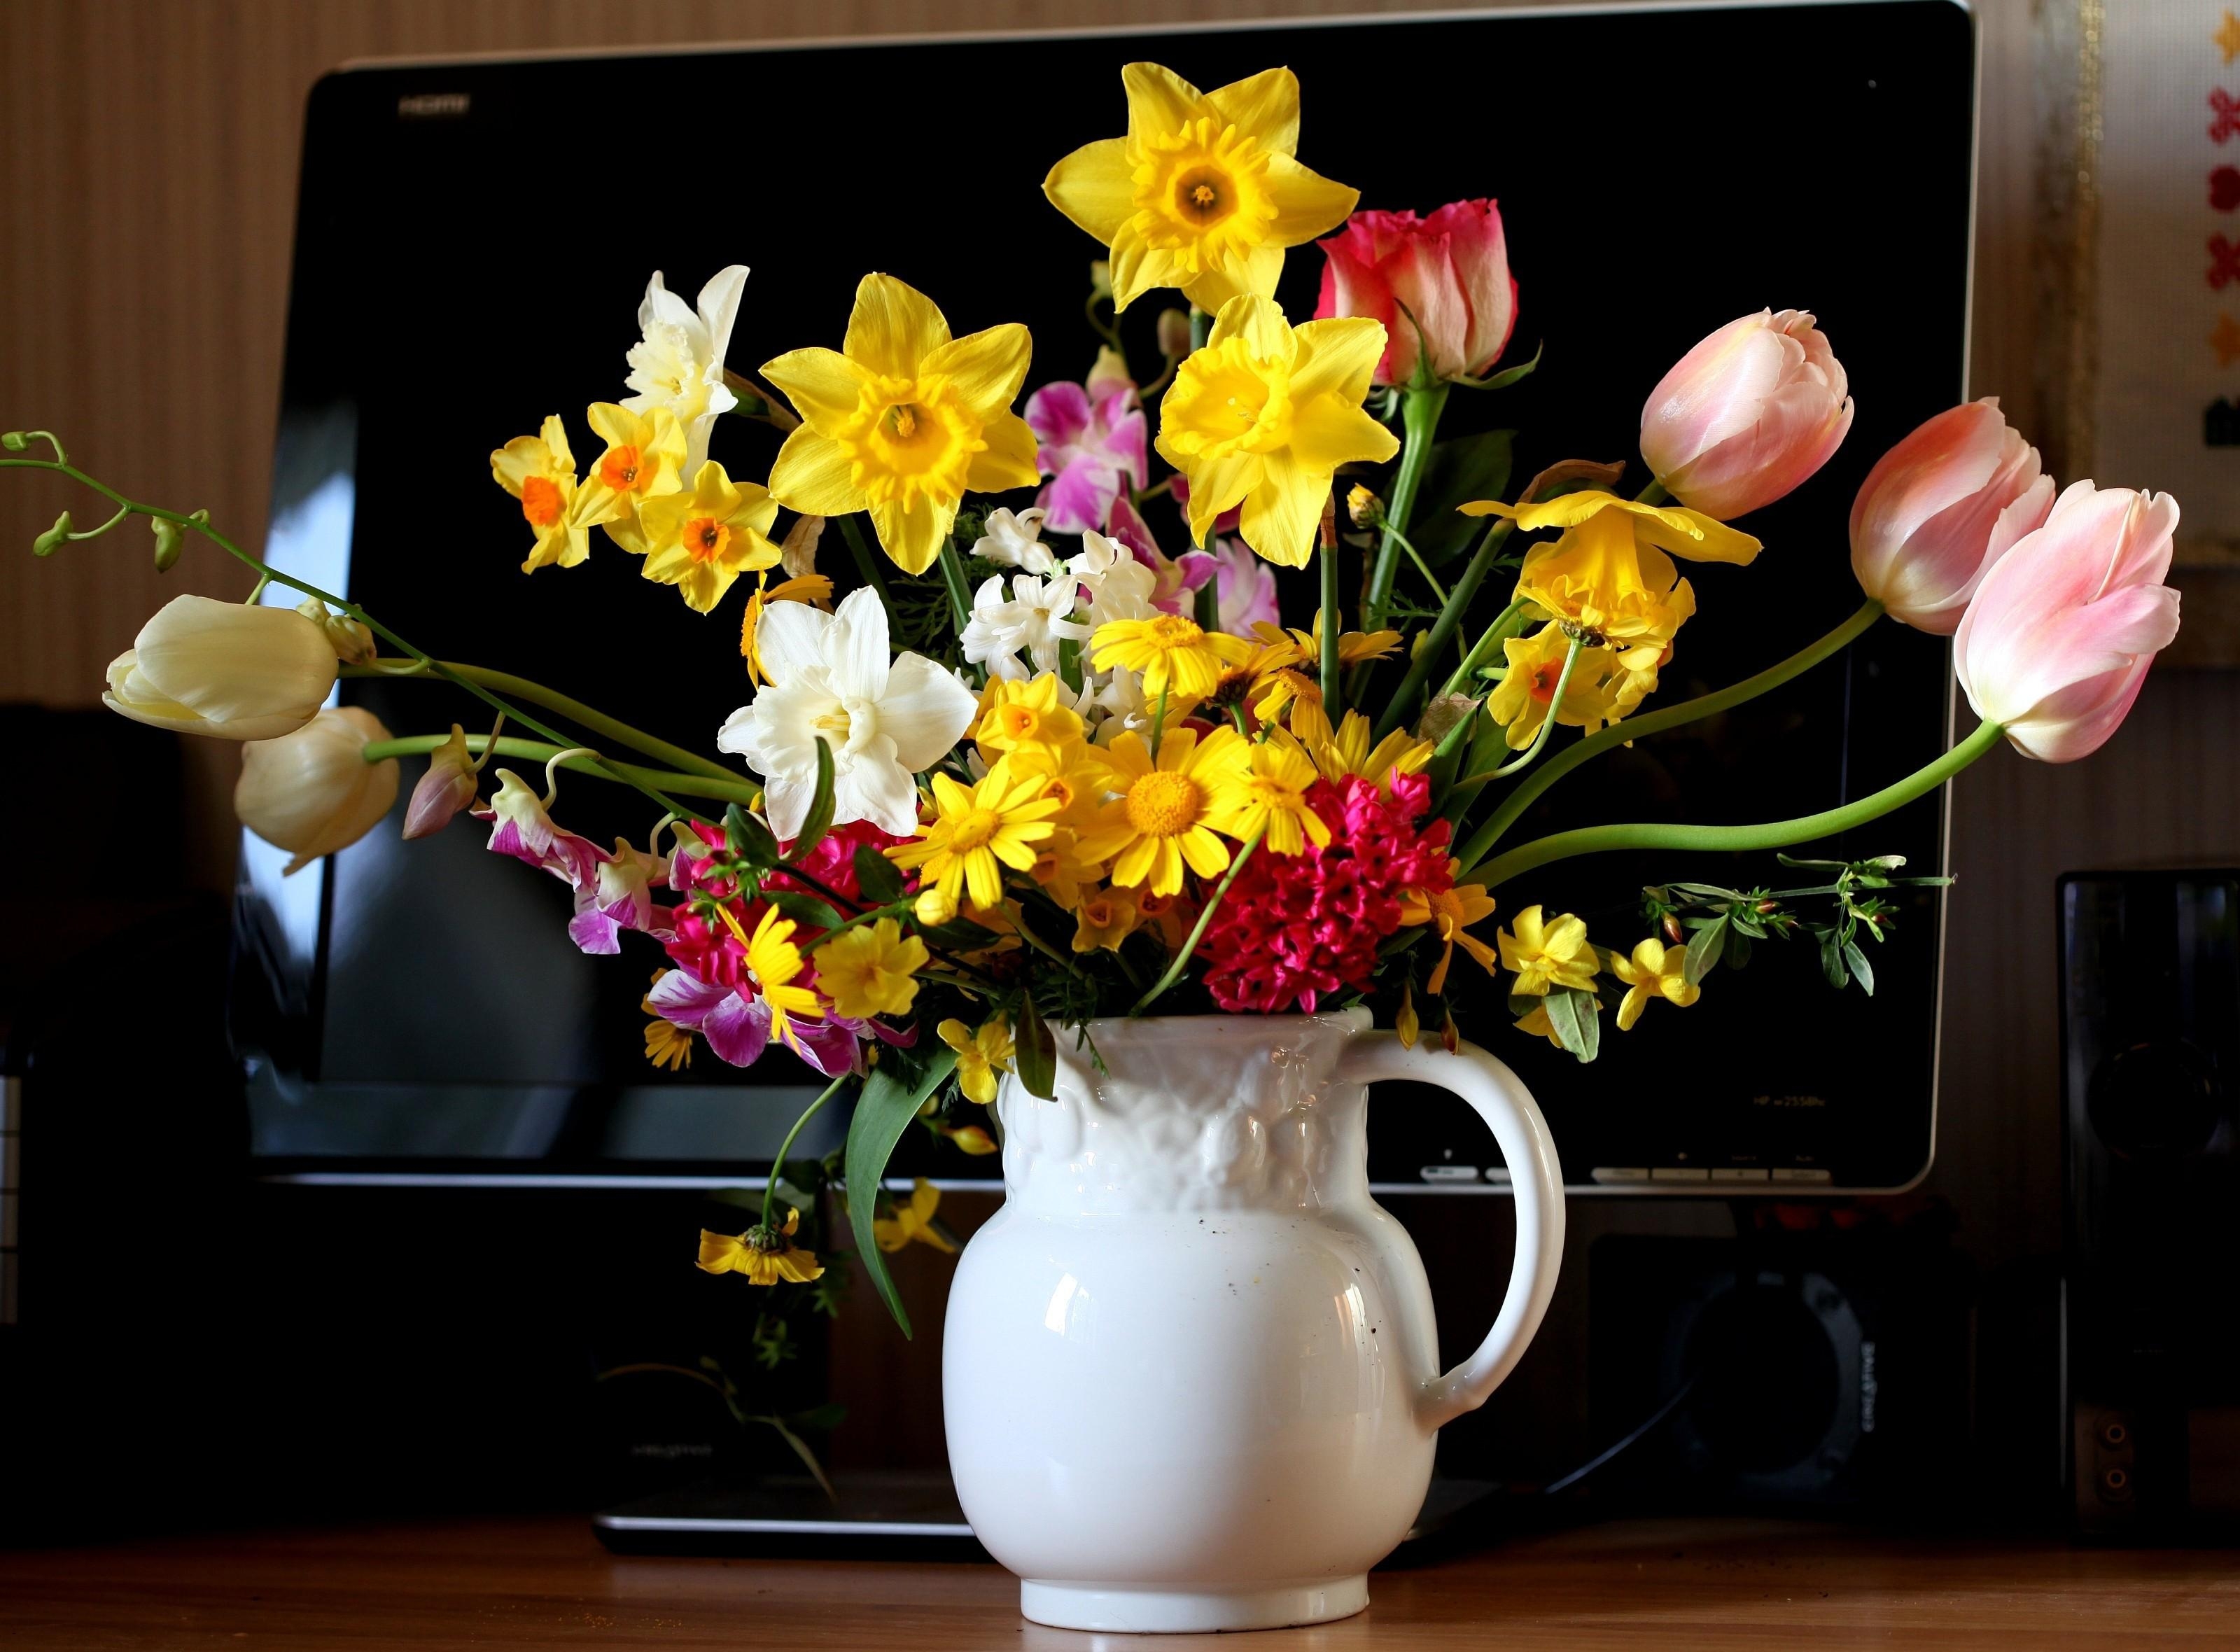 flowers, tulips, narcissussi, hyacinth, bouquet, jug, monitor cellphone